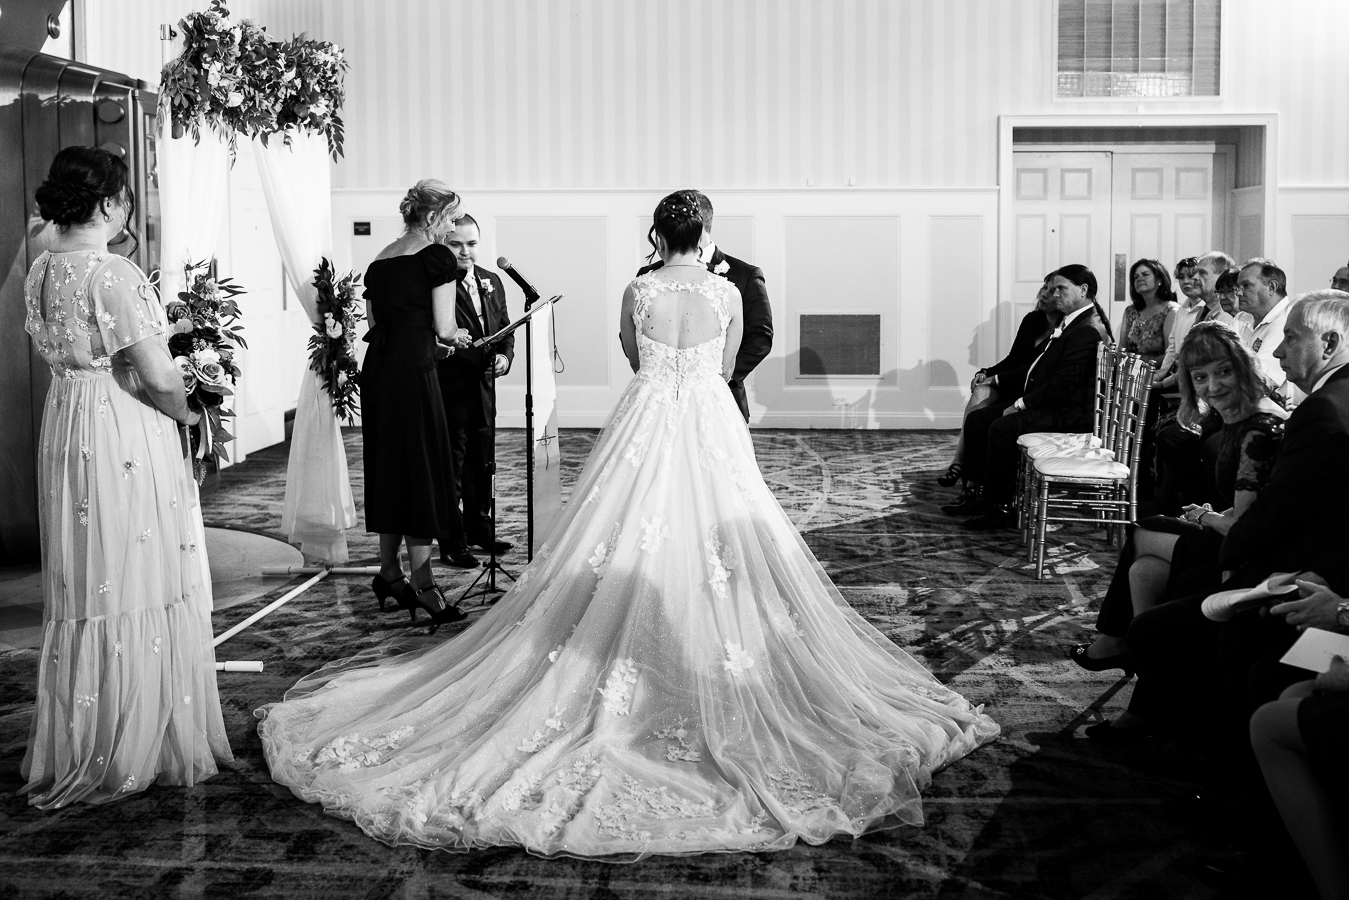 gettysburg hotel wedding photographer, lisa rhinehart, captures this black and white image of the bride's dress and her train laid out during their wedding ceremony inside of the Gettysburg hotel 